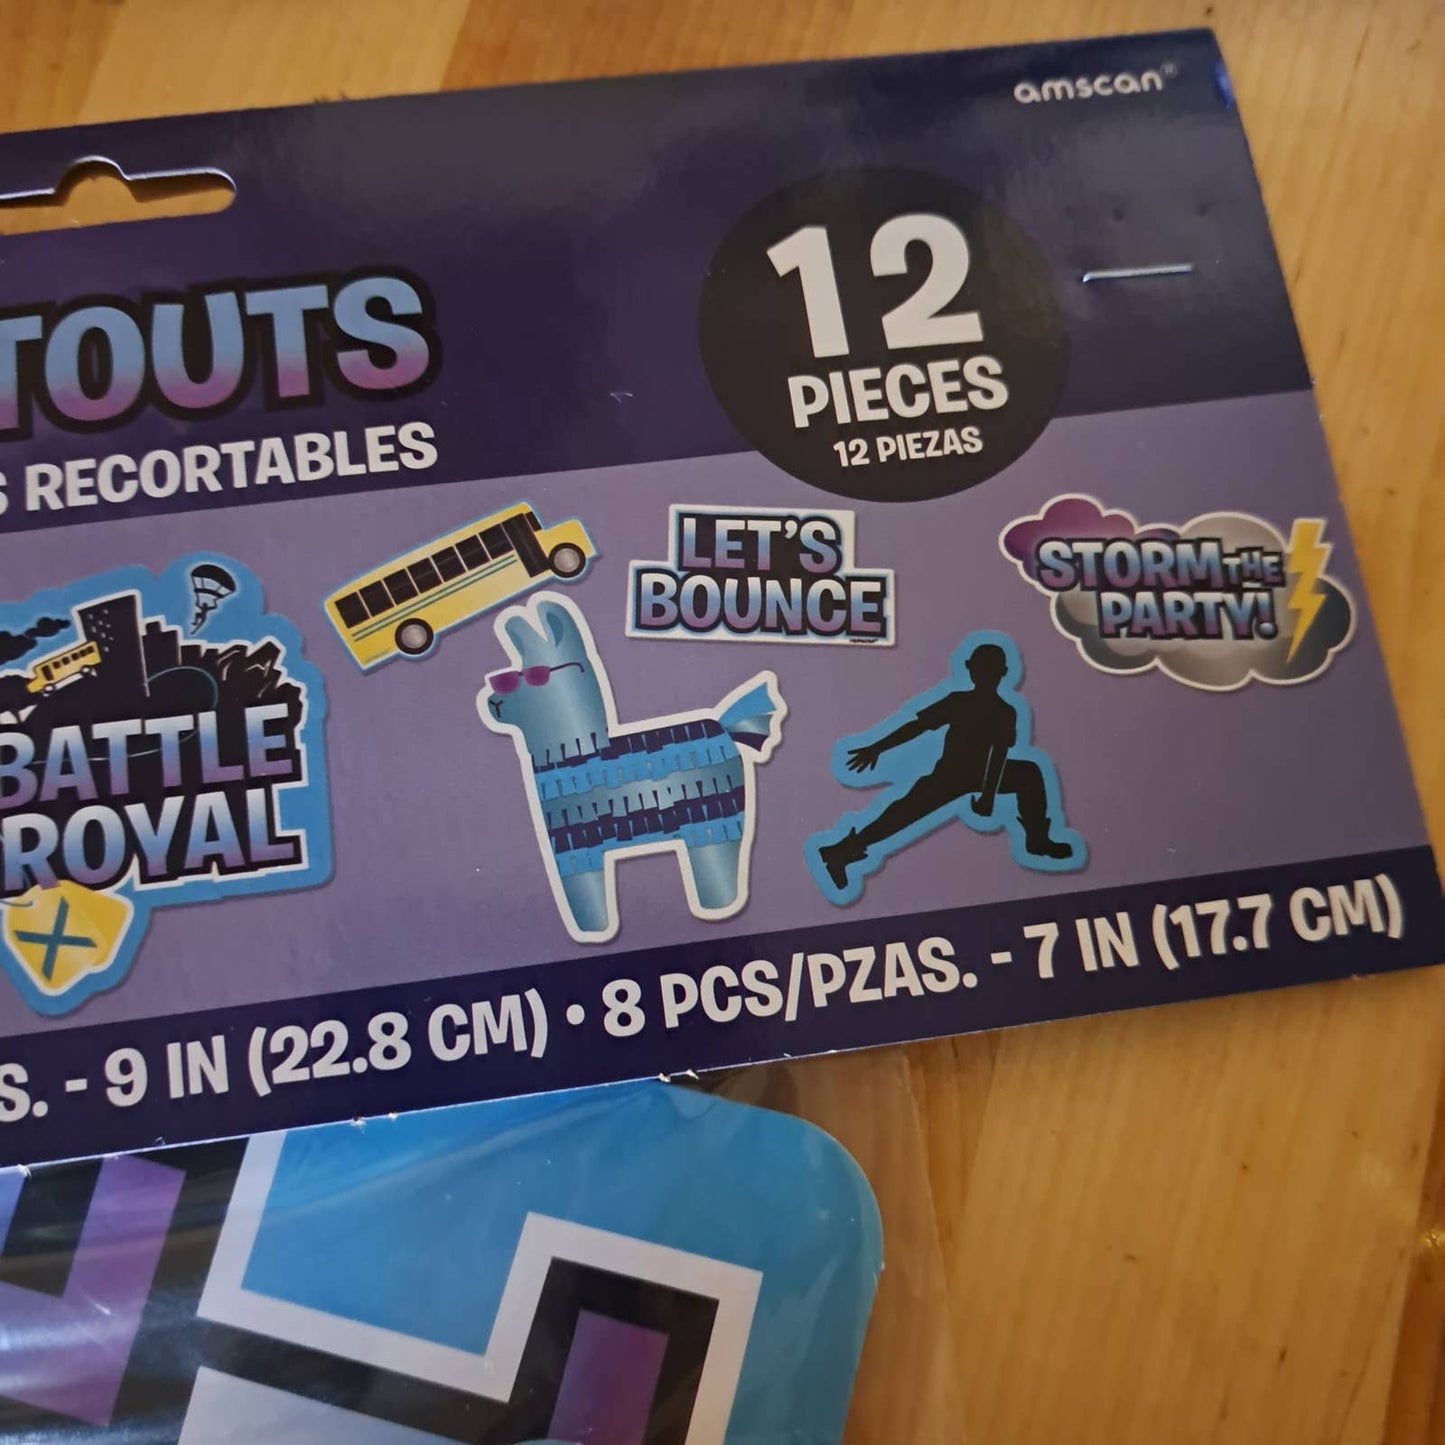 48 GAMERS - Extra Large Battle Royal Gamer Birthday Party Decorations!